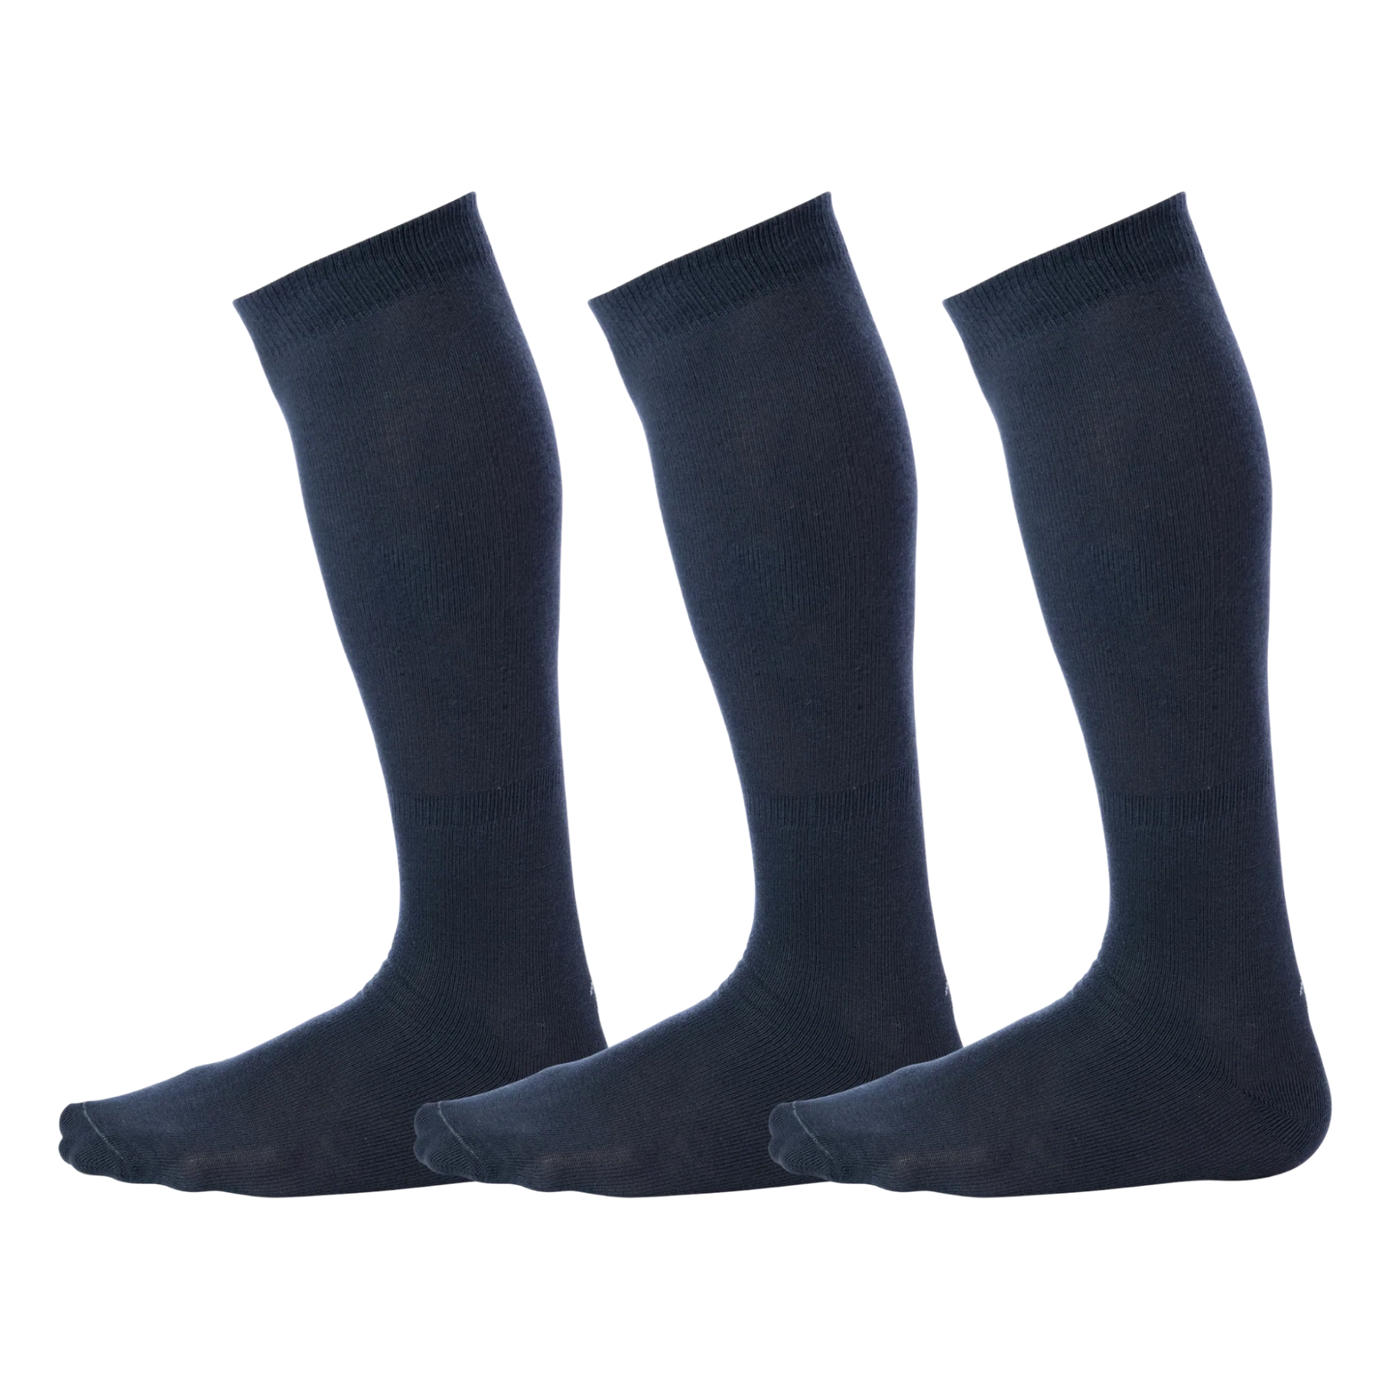 Gray on Gray (3 pairs) | Cotton Over the Calf Dress Socks